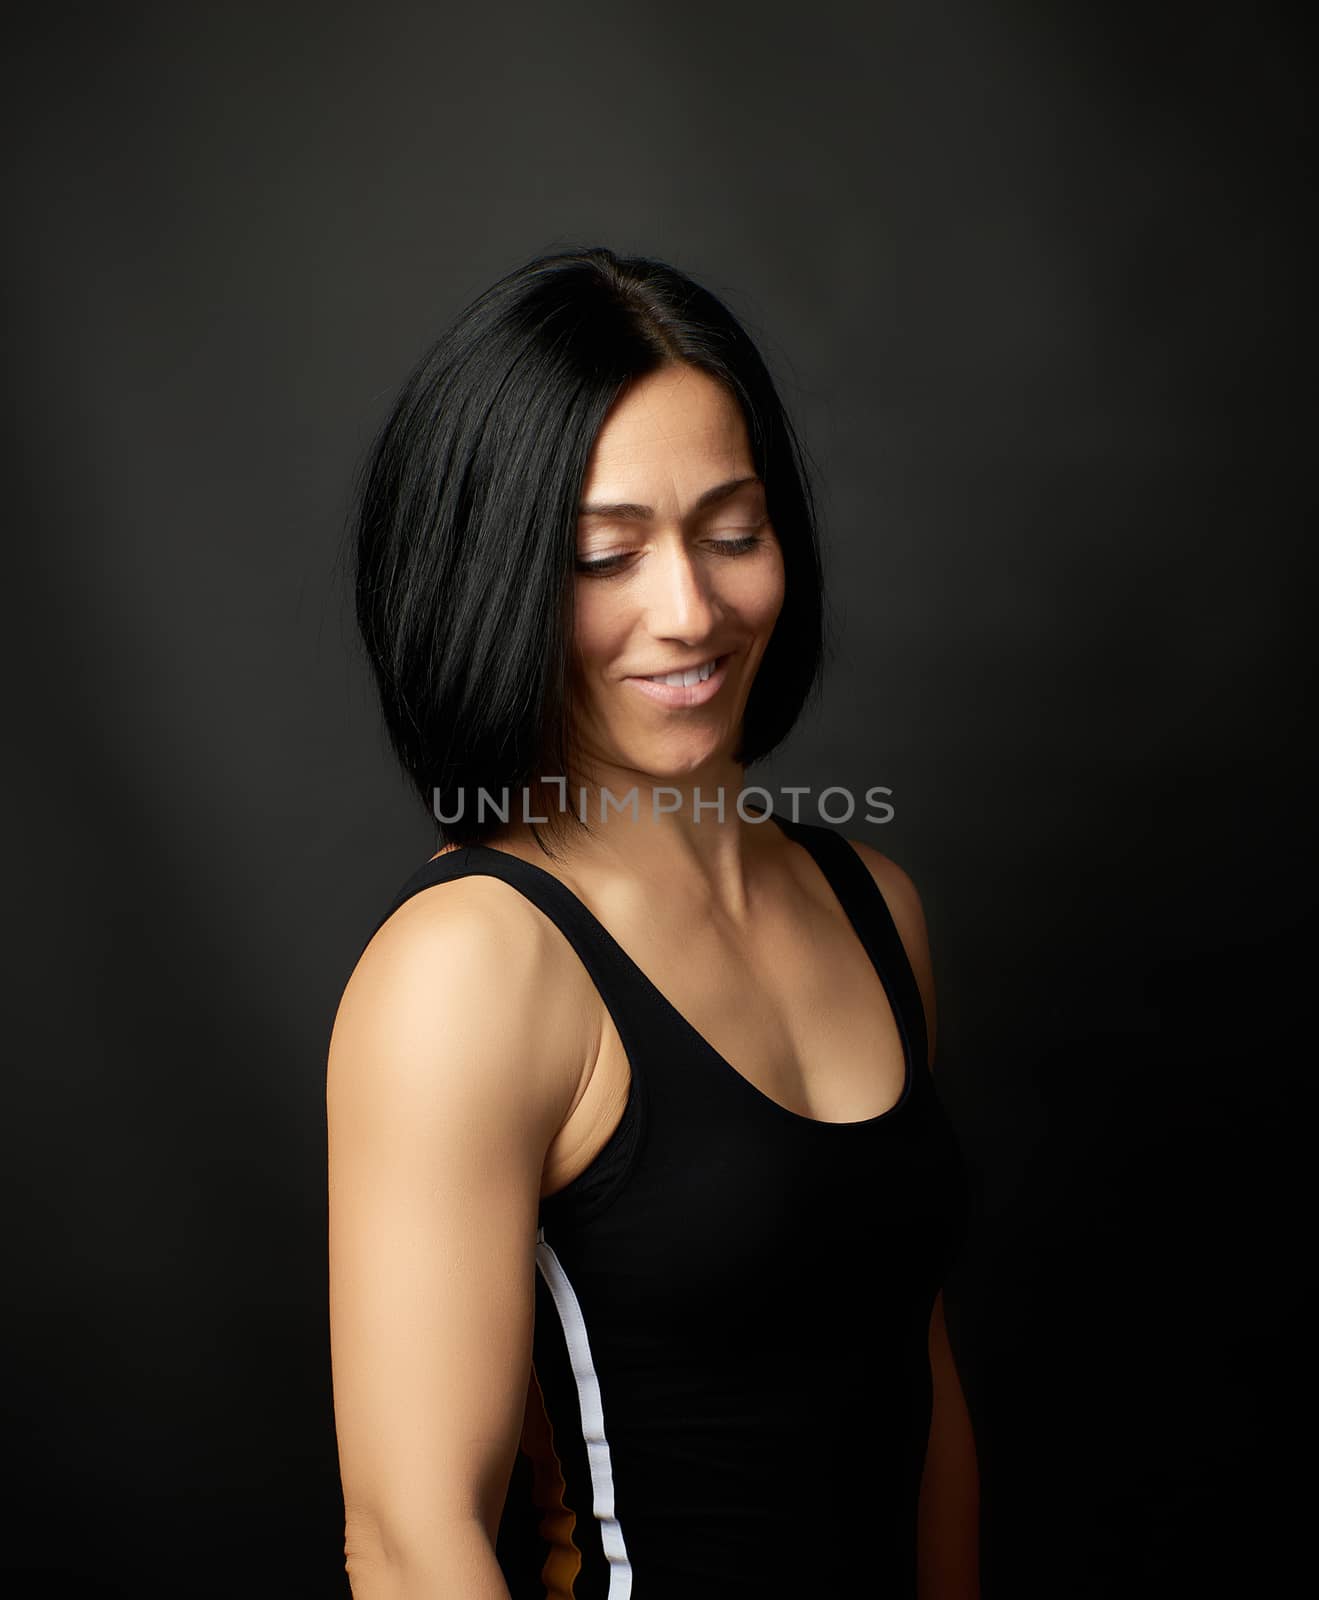 portrait of a beautiful young woman with black hair on a dark background, girl smiling